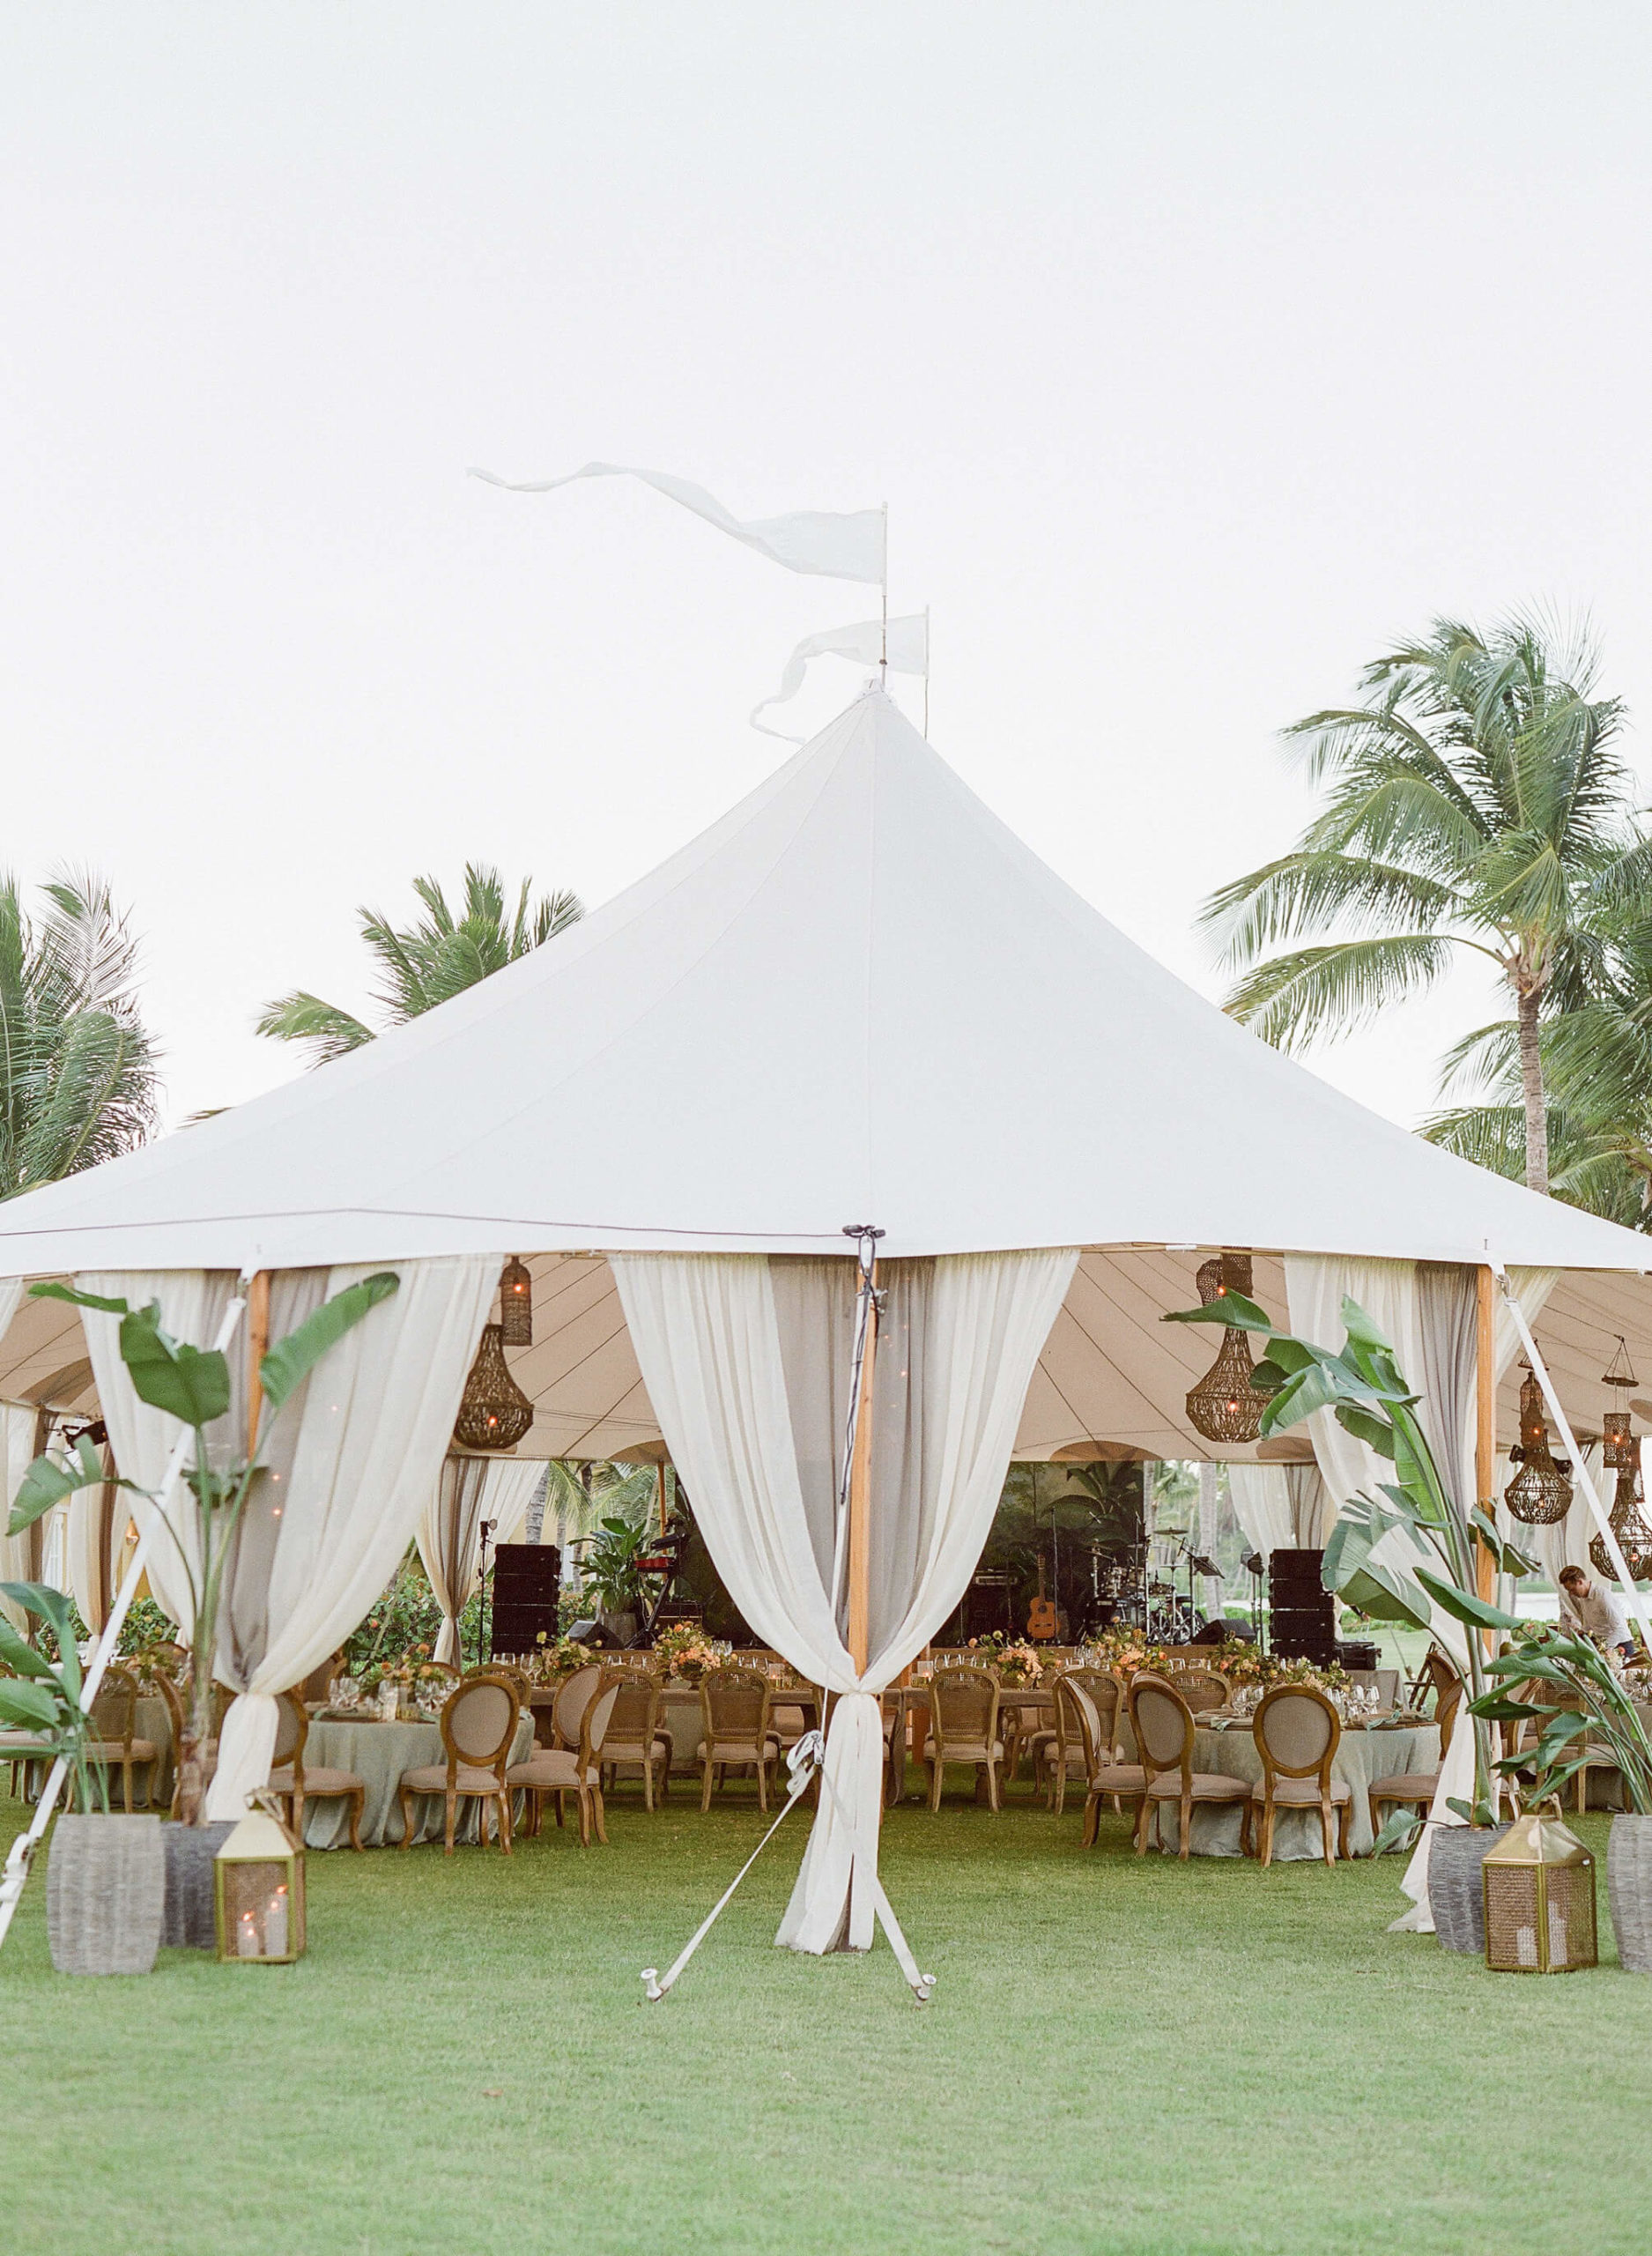 a rented tent is a sustainable way to give back through your wedding